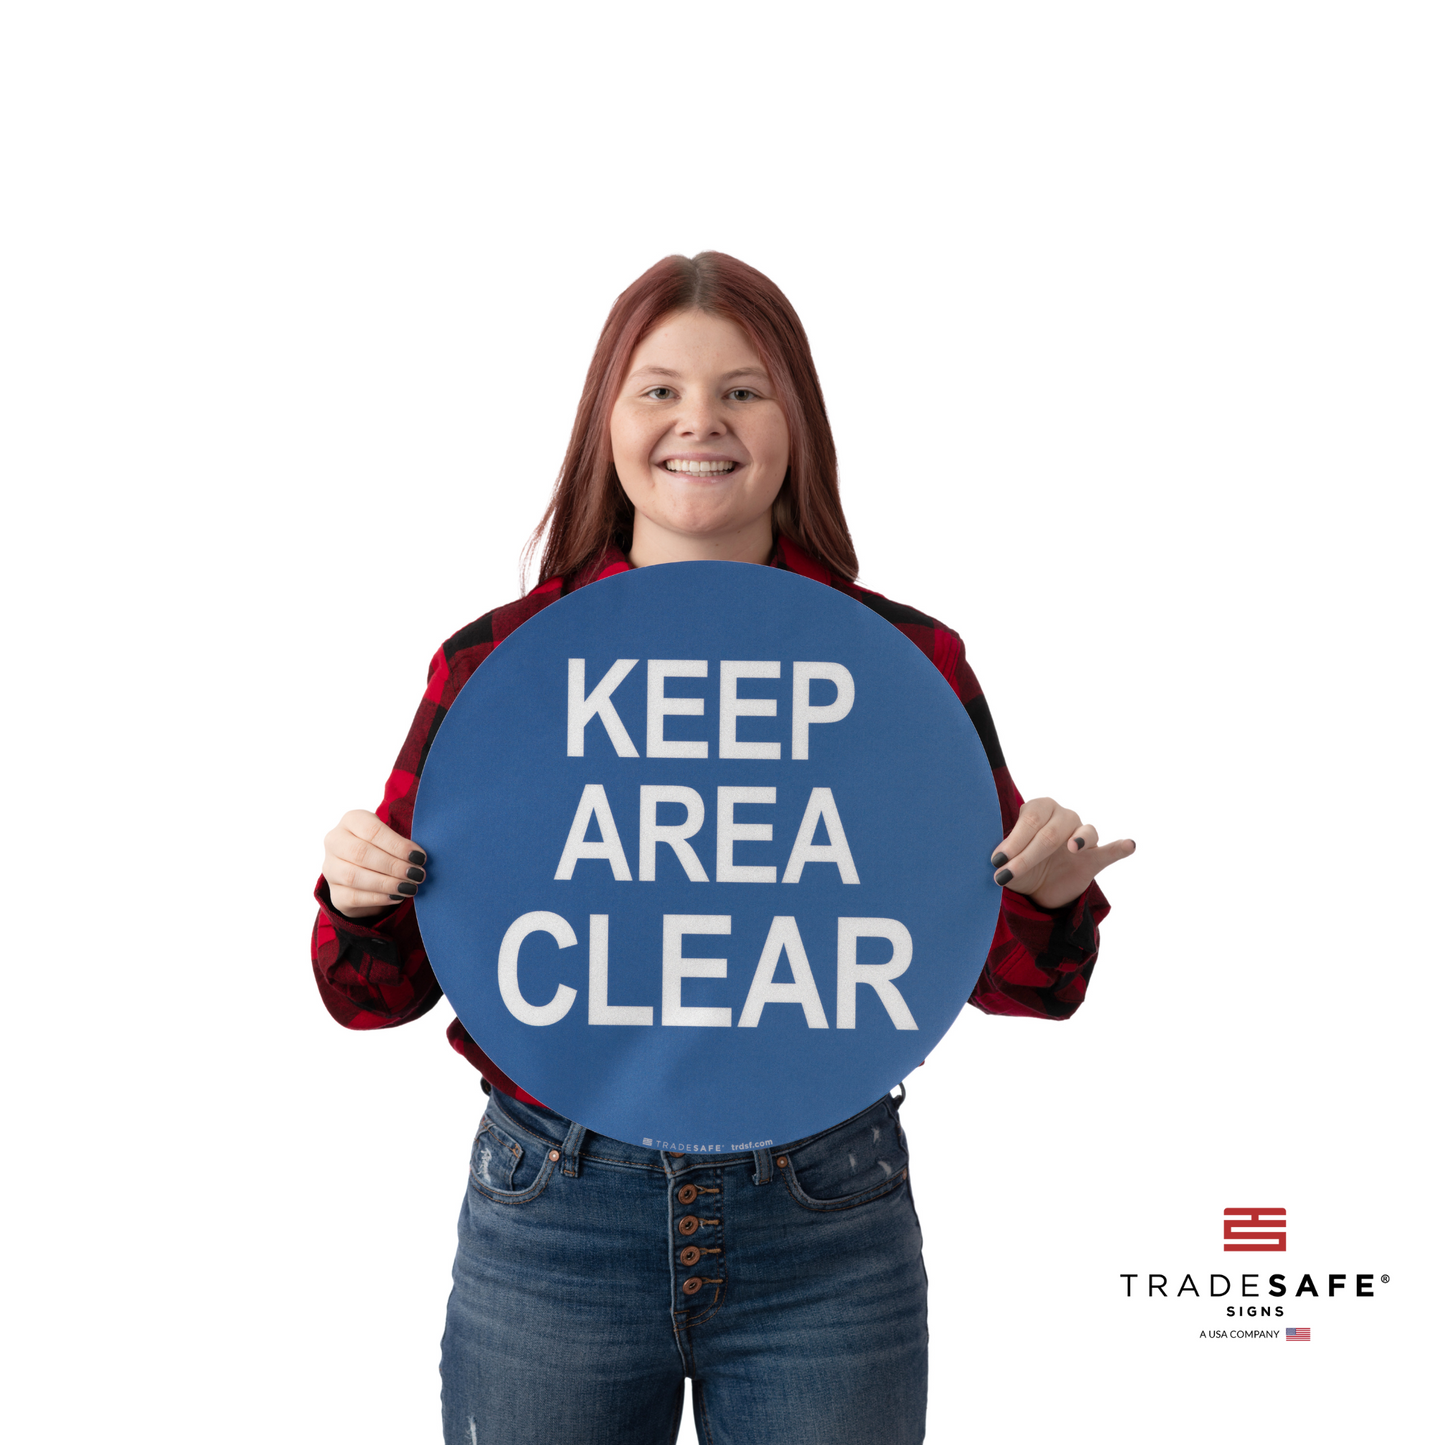 a person holding an adhesive vinyl sign with the text "keep area clear"